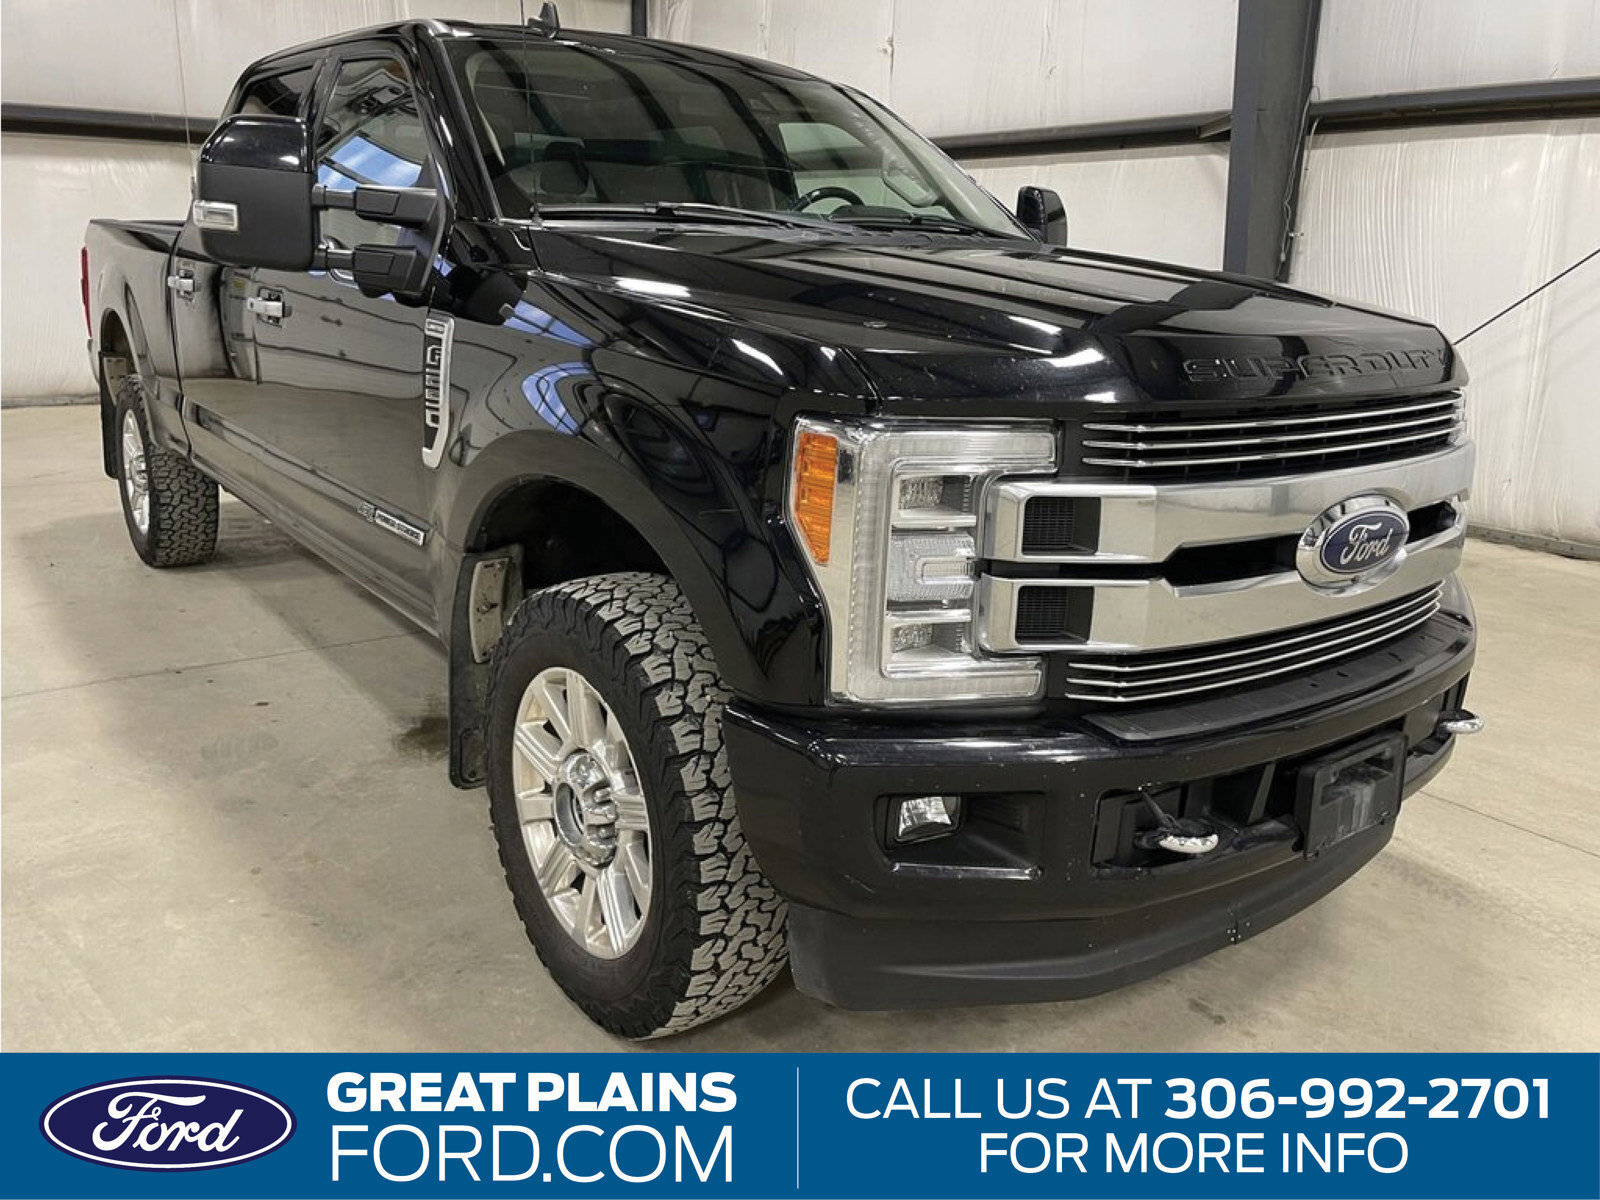 2019 Ford F-250 Limited | 4x4 | Leather | Nav/Back Up Camera/Keyle